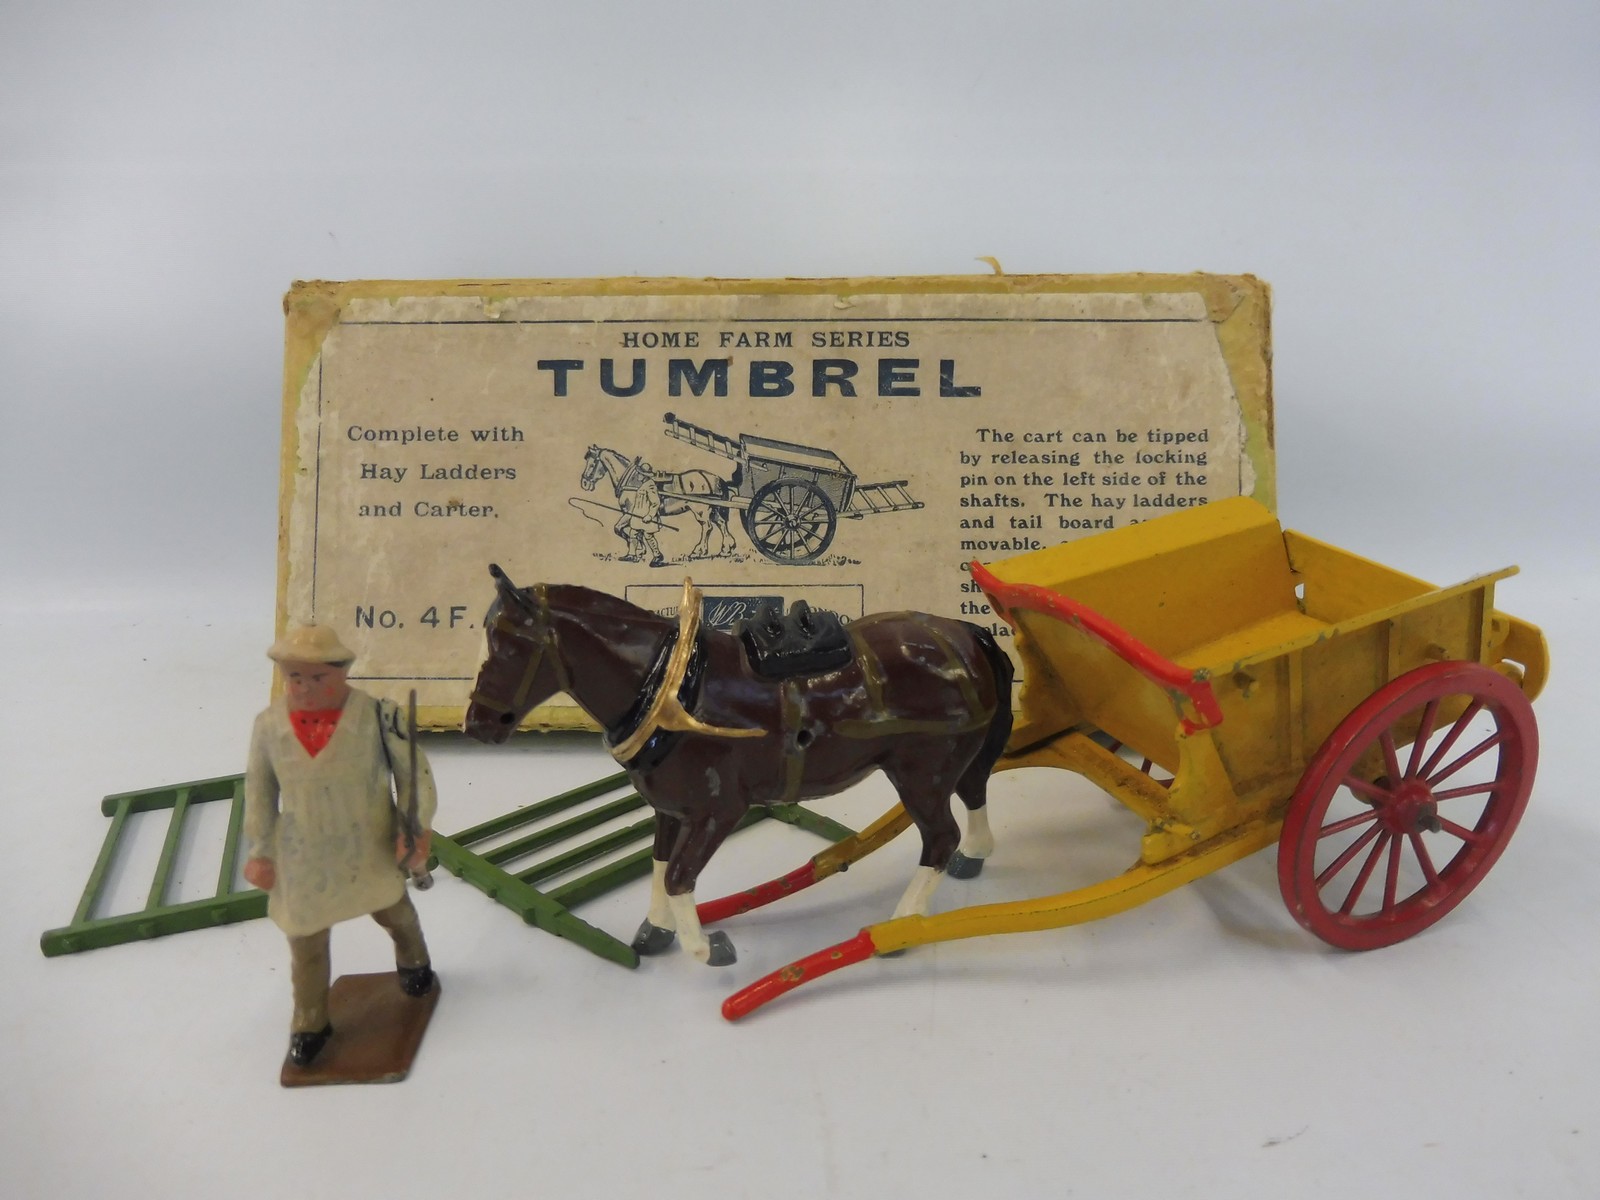 A Britains Home Farm Series no. 4F, in original box - lead cart, figure and horse. - Image 2 of 2